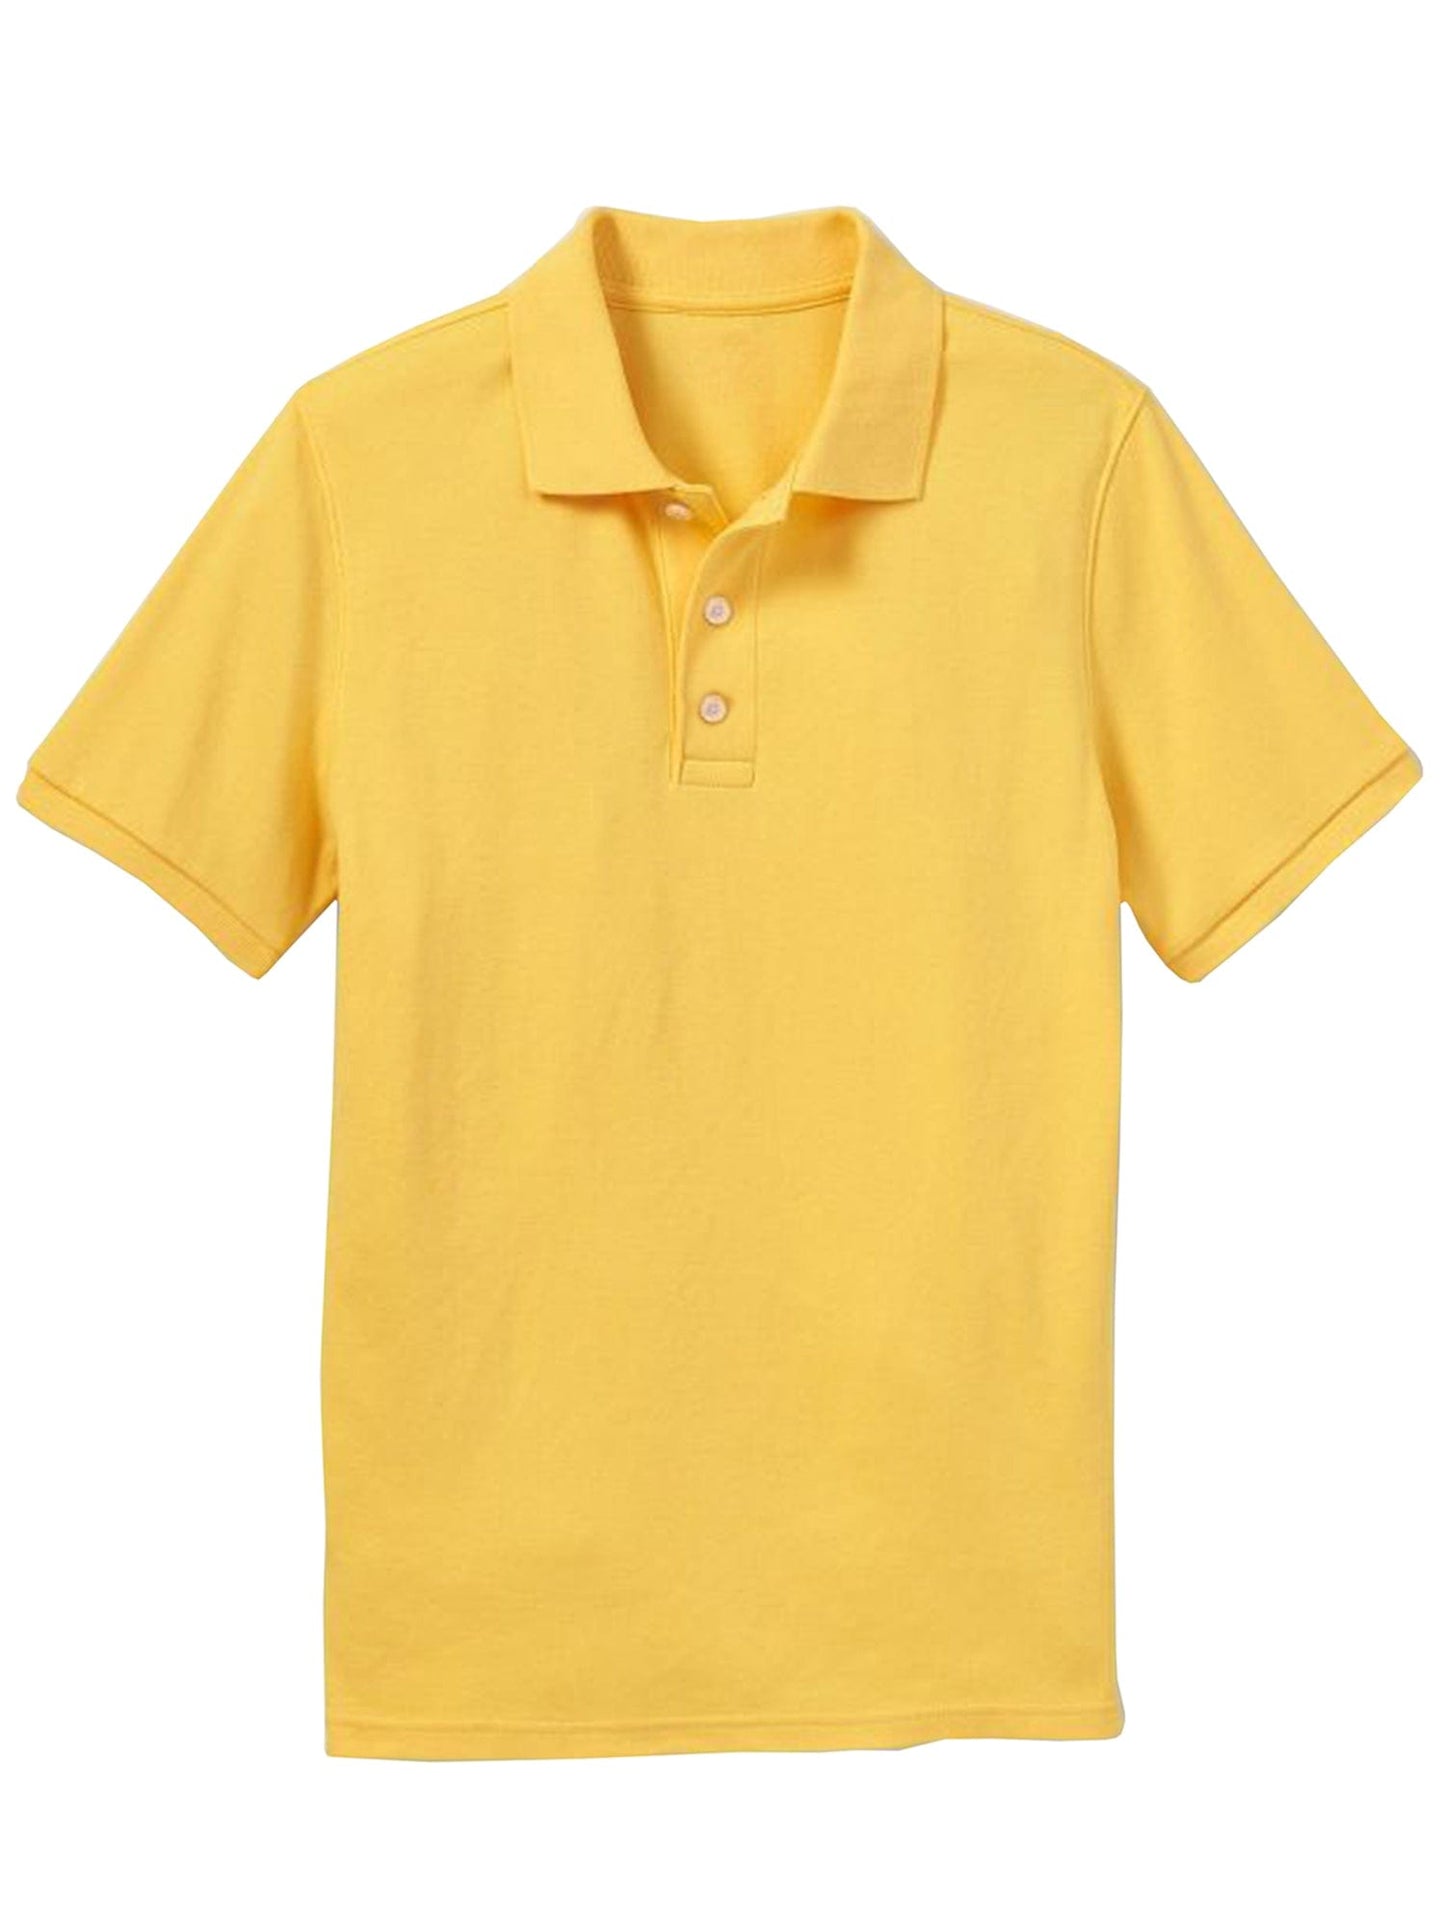 Young Boy's Short Sleeve Polo Shirt (Sizes 4-7) - GalaxybyHarvic